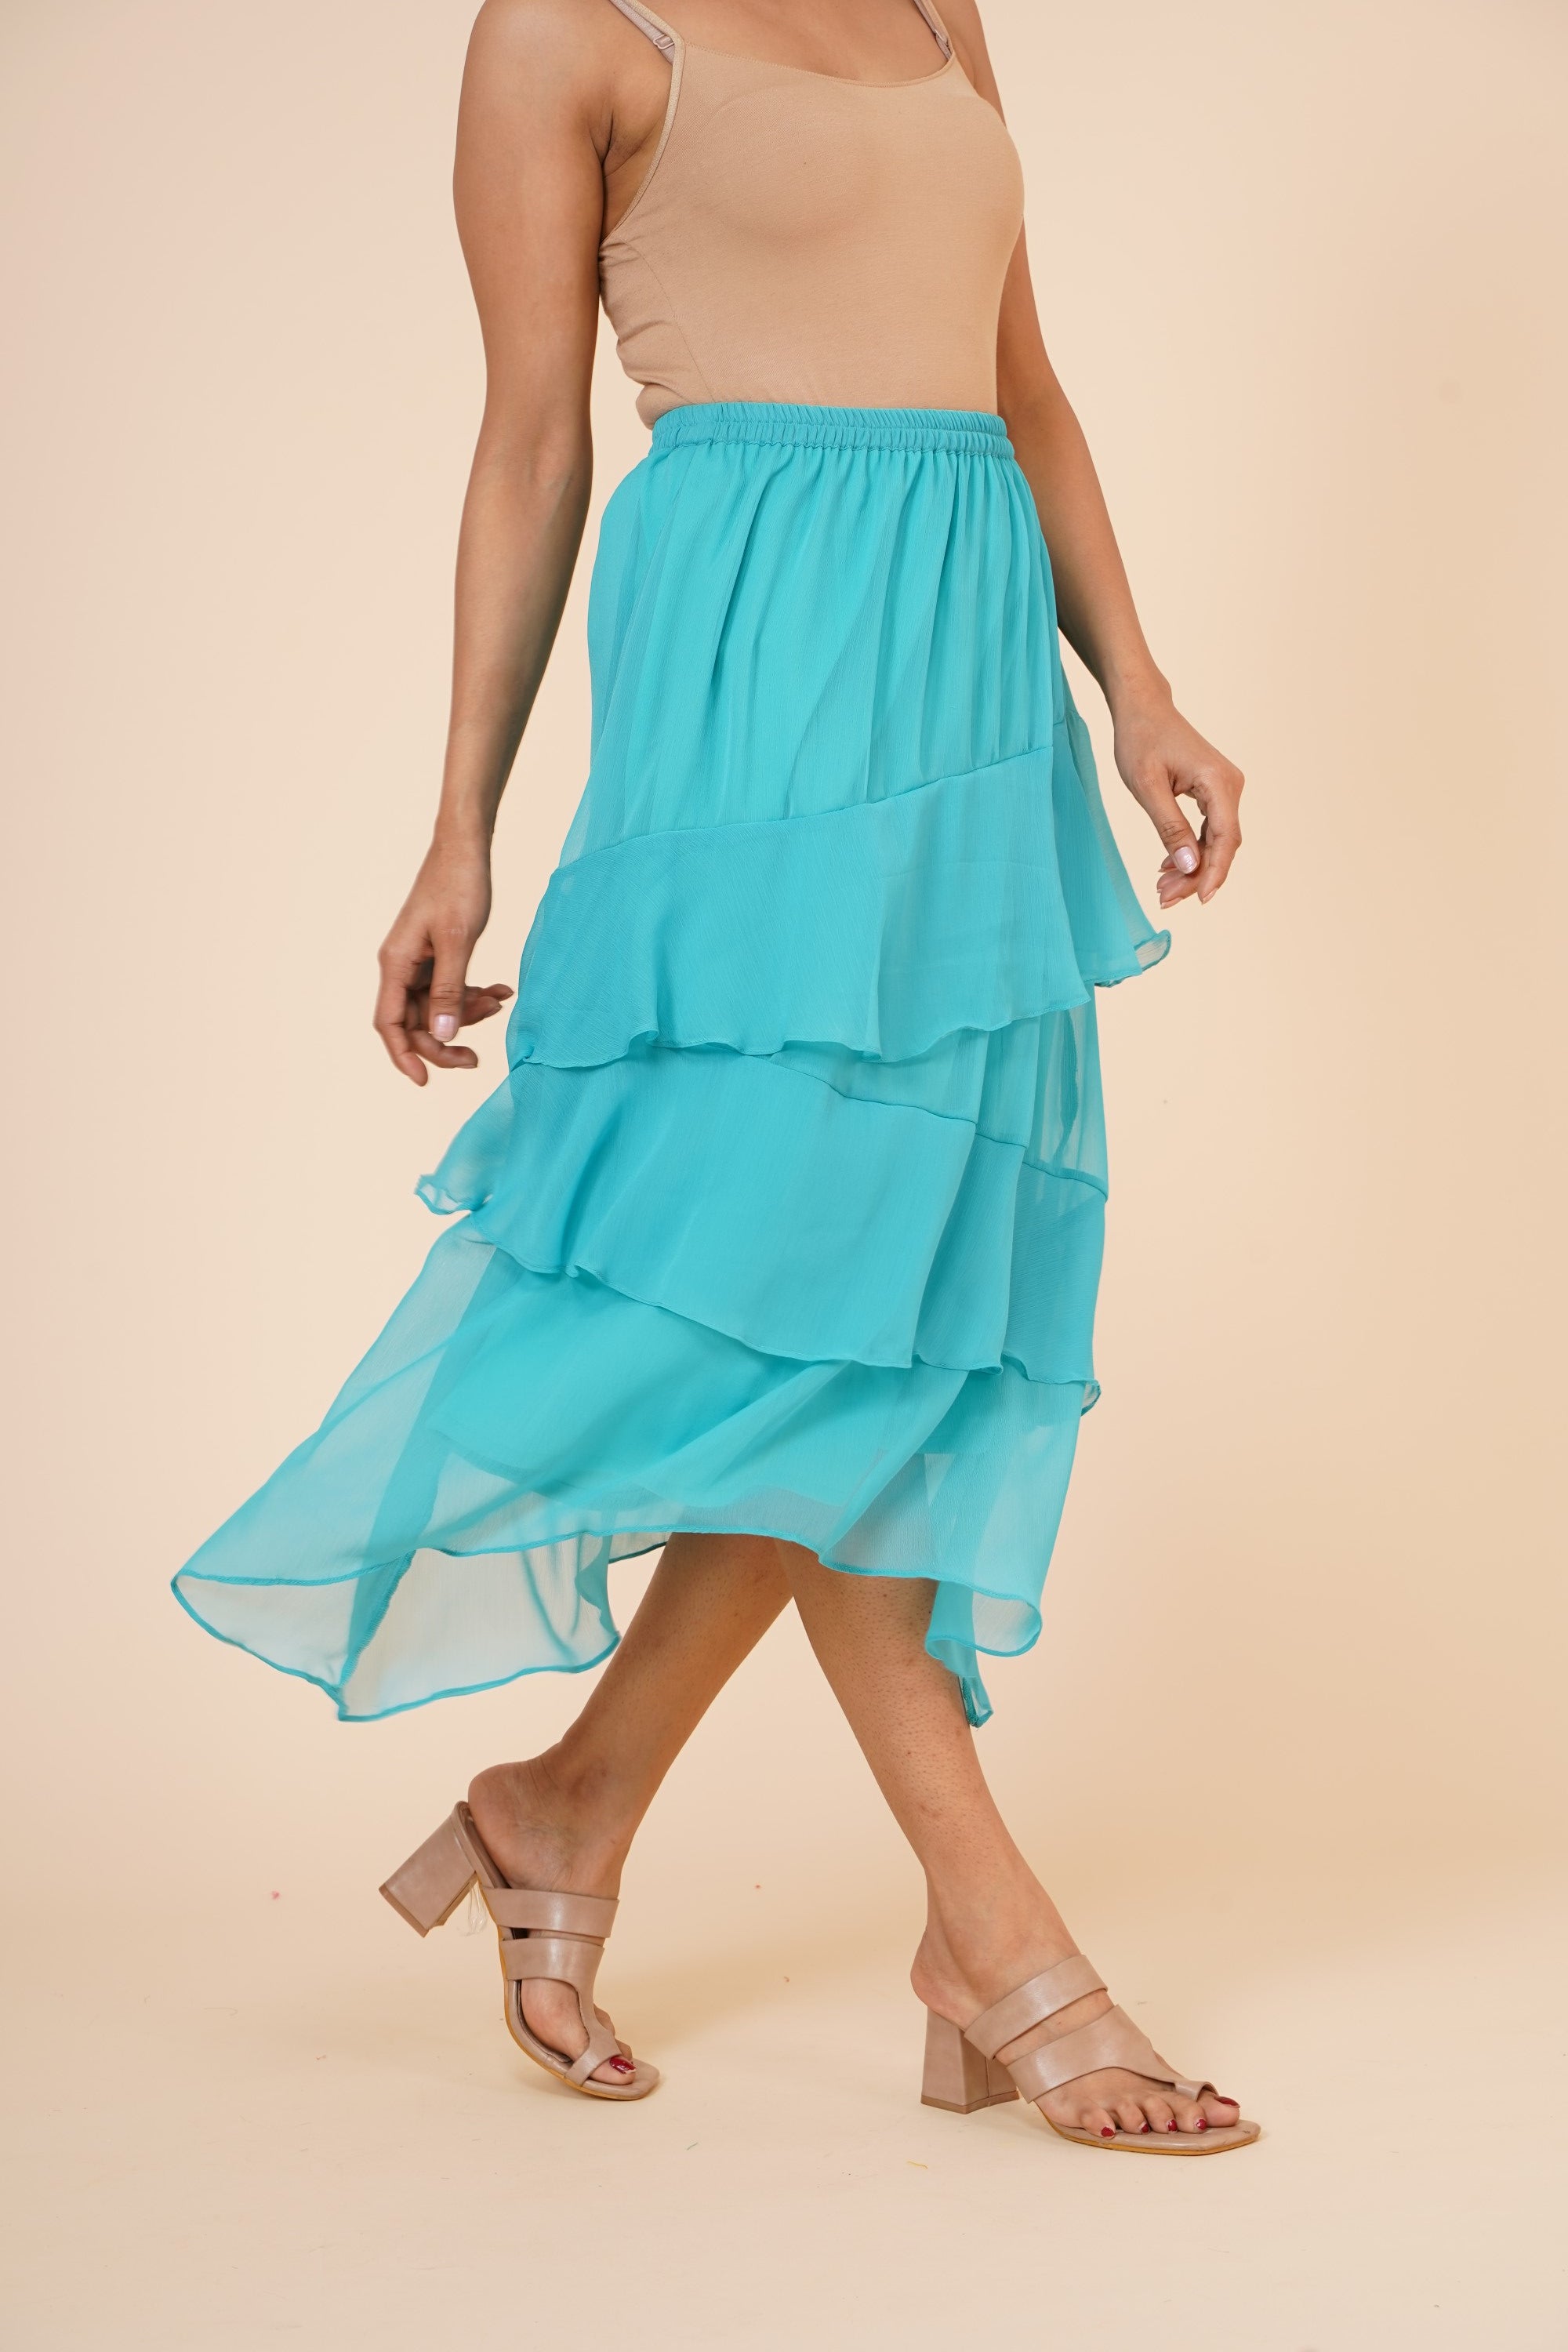 Women's Chiffon Ruffle Skirt With Elastic In Sky Blue - MIRACOLOS by Ruchi